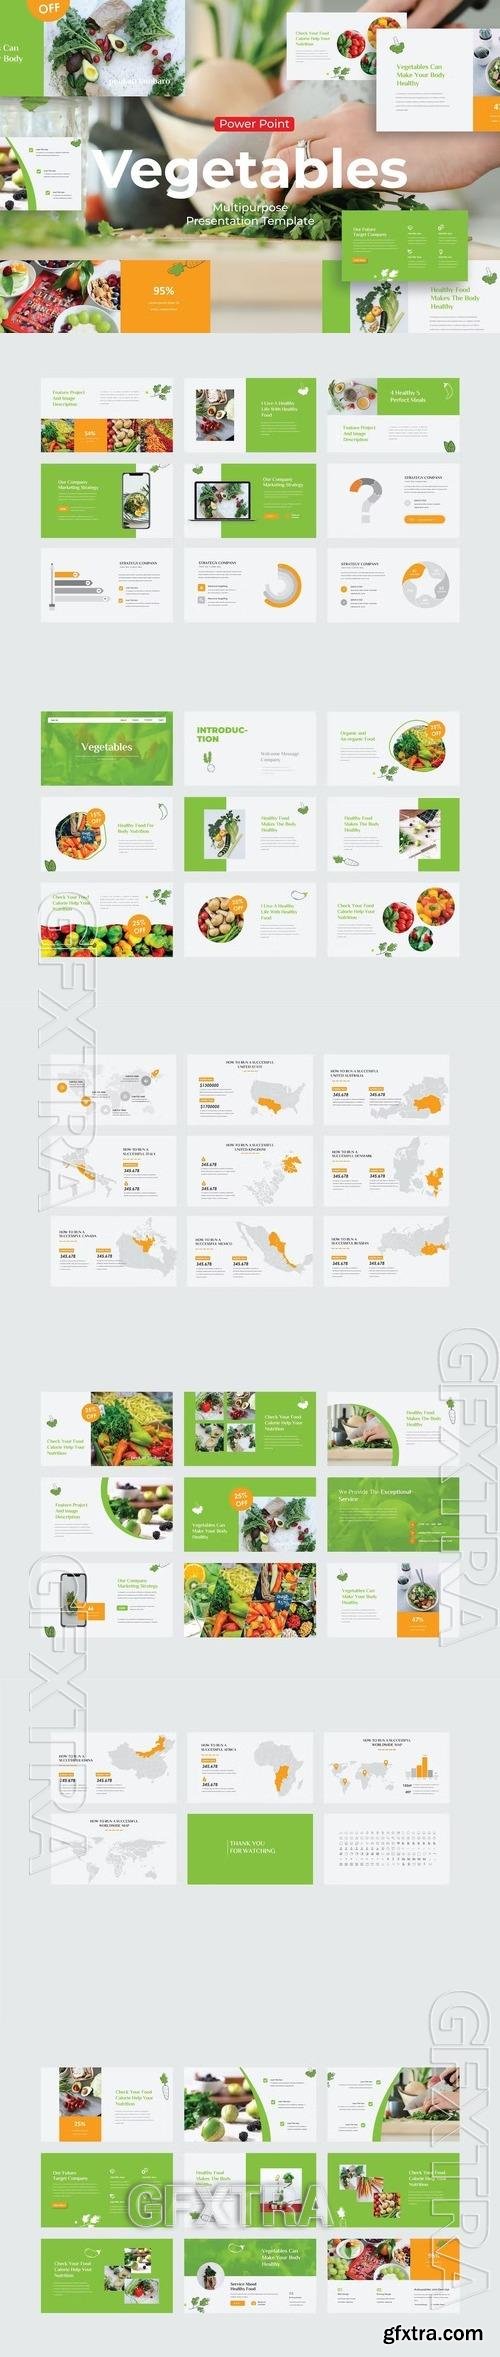 Vegetables - PowerPoint Template A2ZK3DB